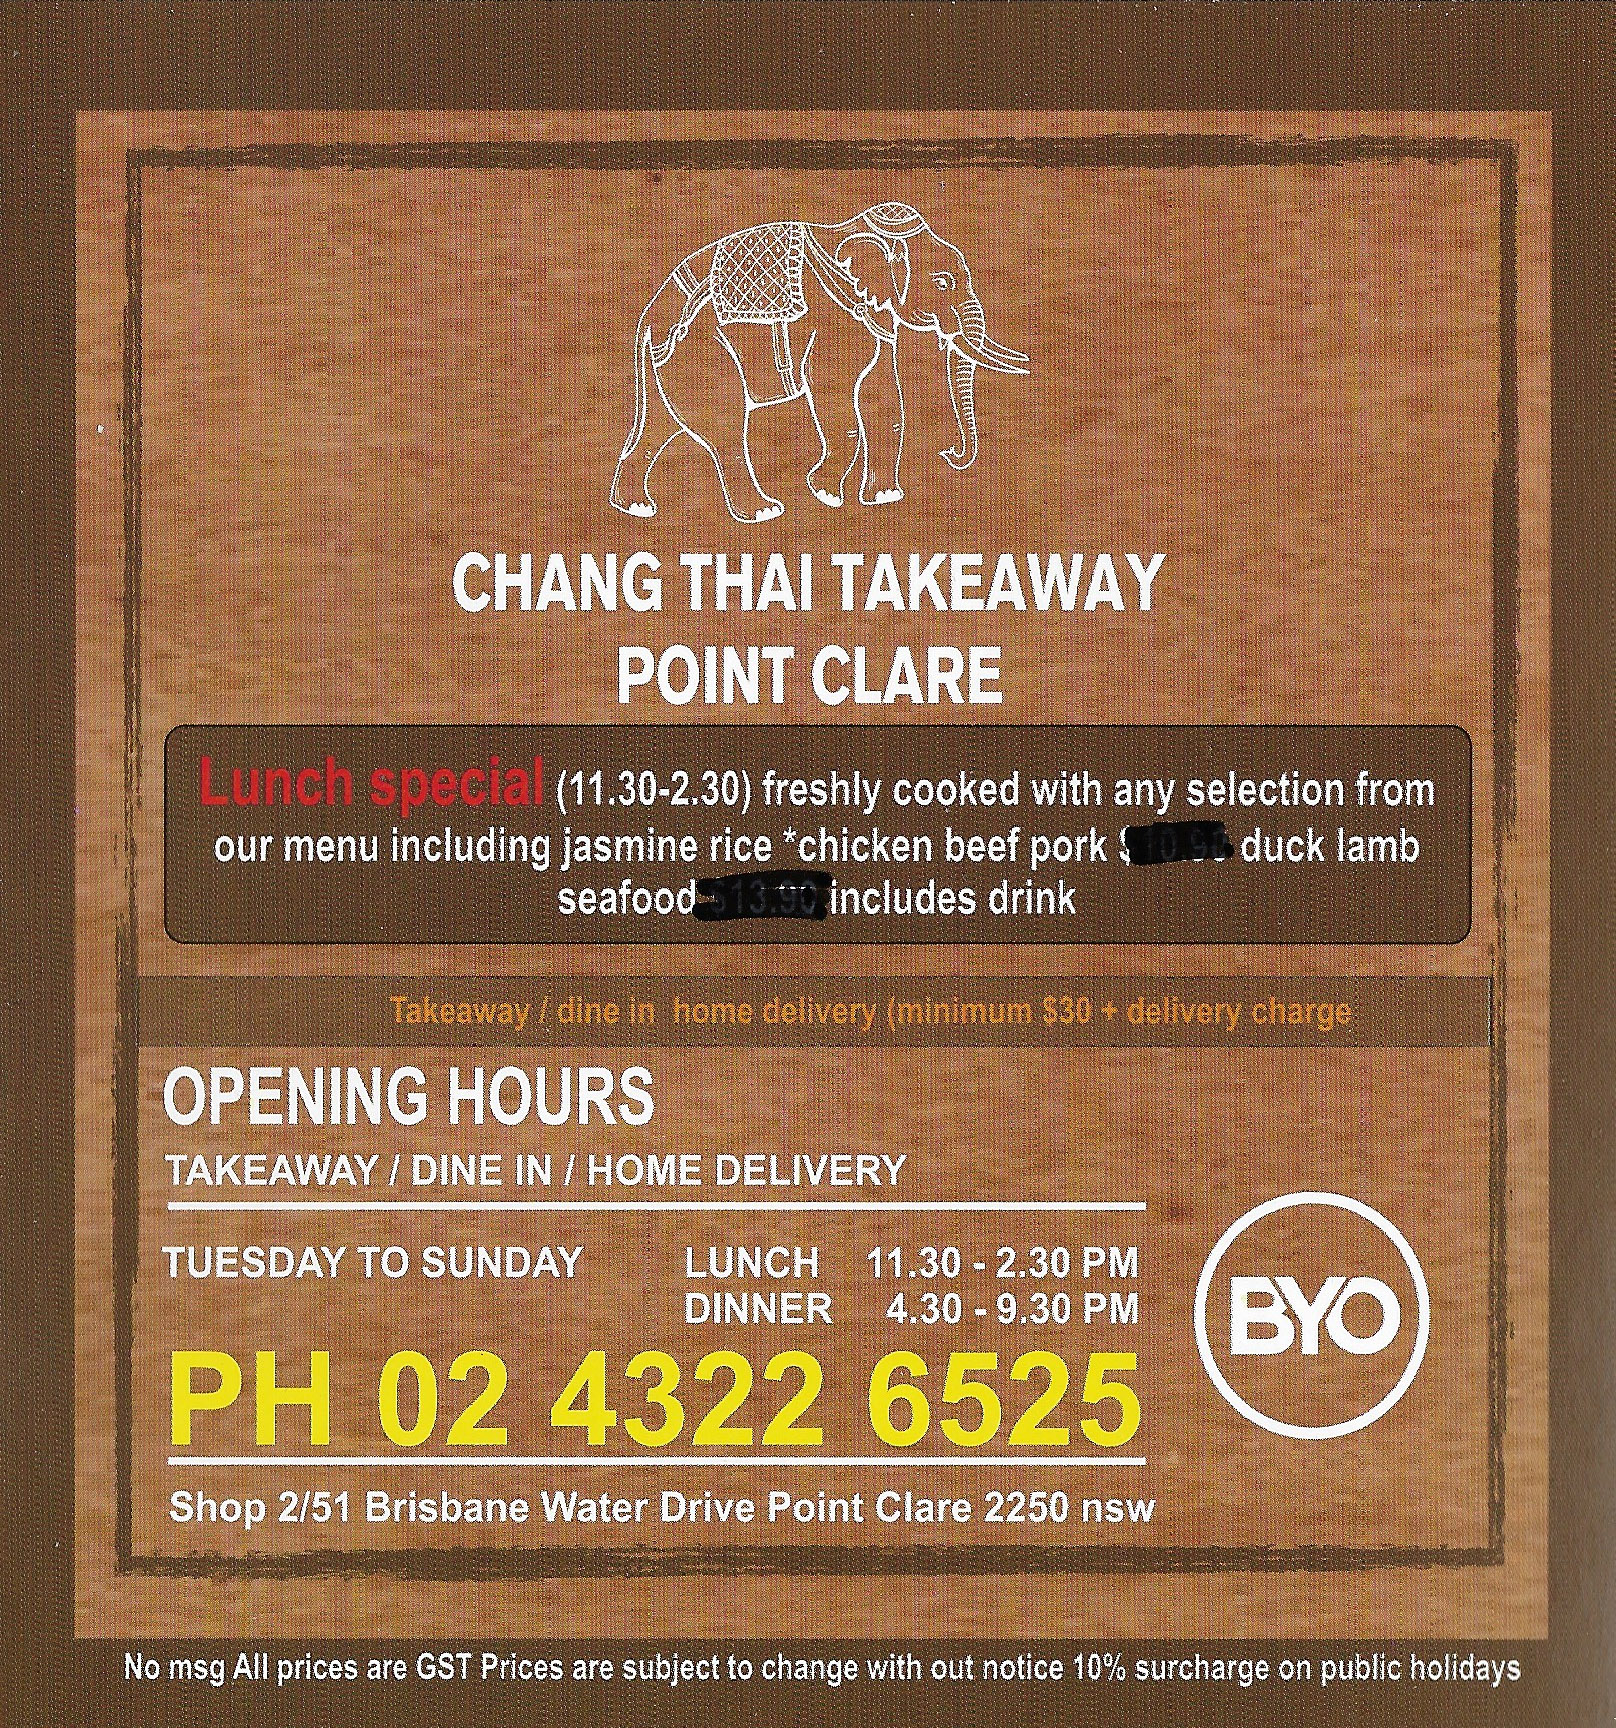 Chang Thai Takeaway Point Clare Central Coast - NSW | OBZ Online Business Zone